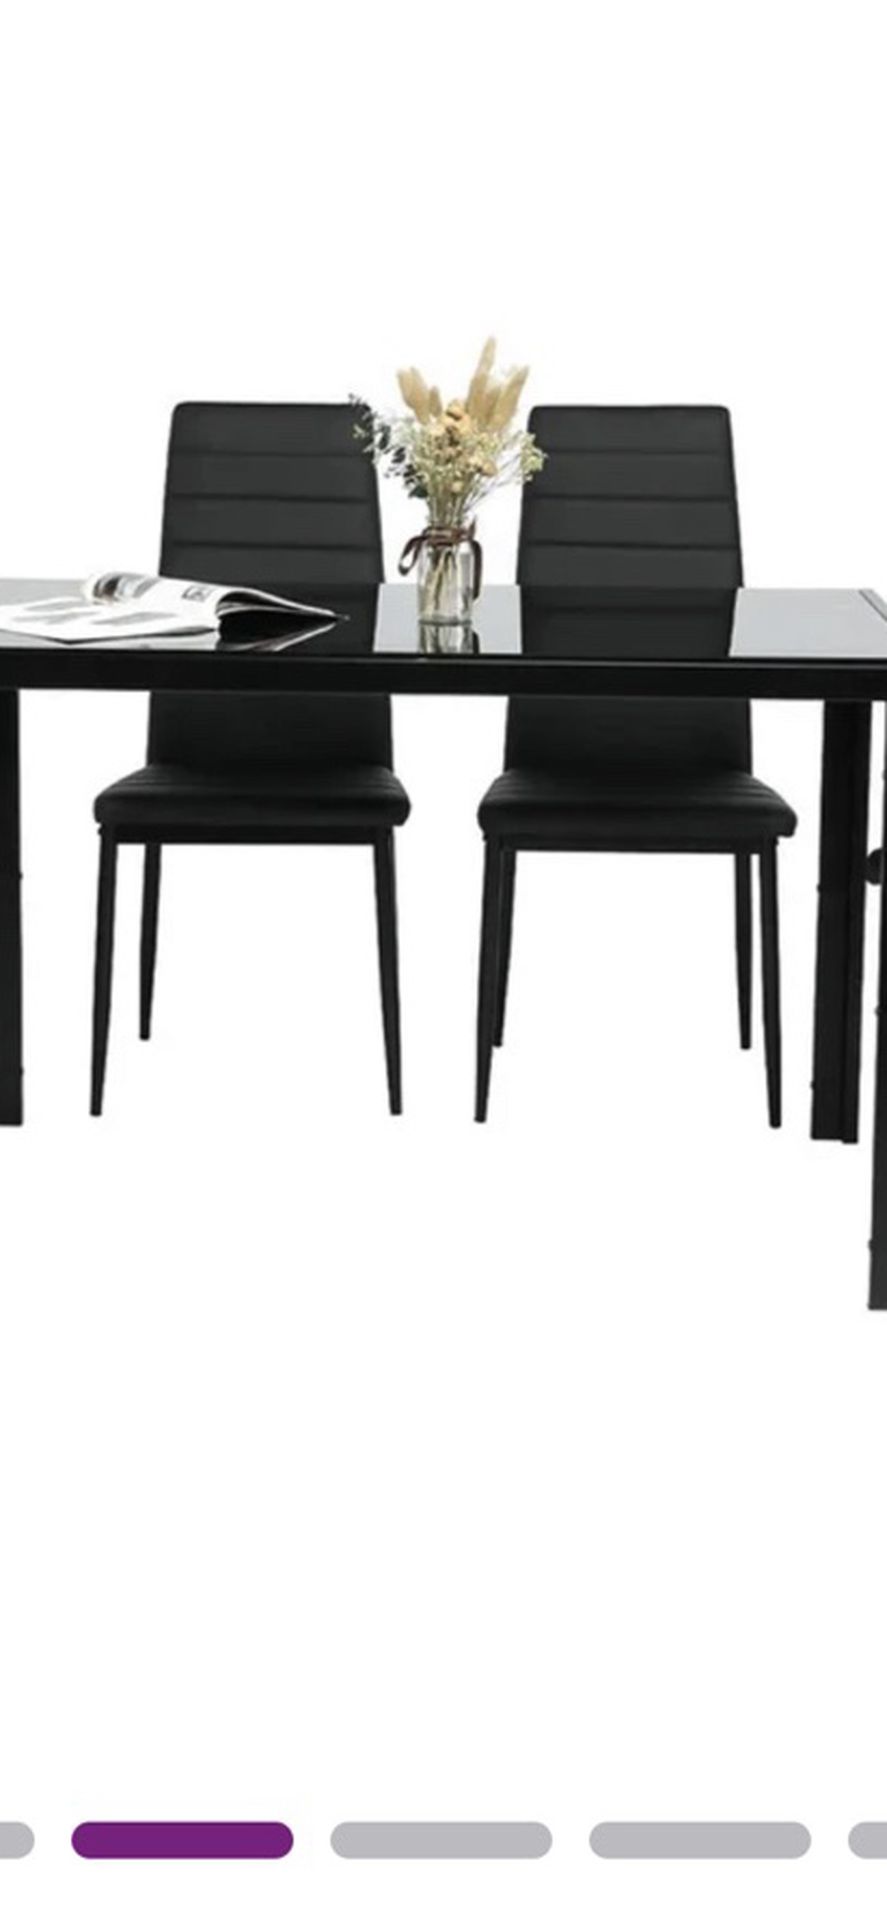 Black Glass Top Table (retail $250)